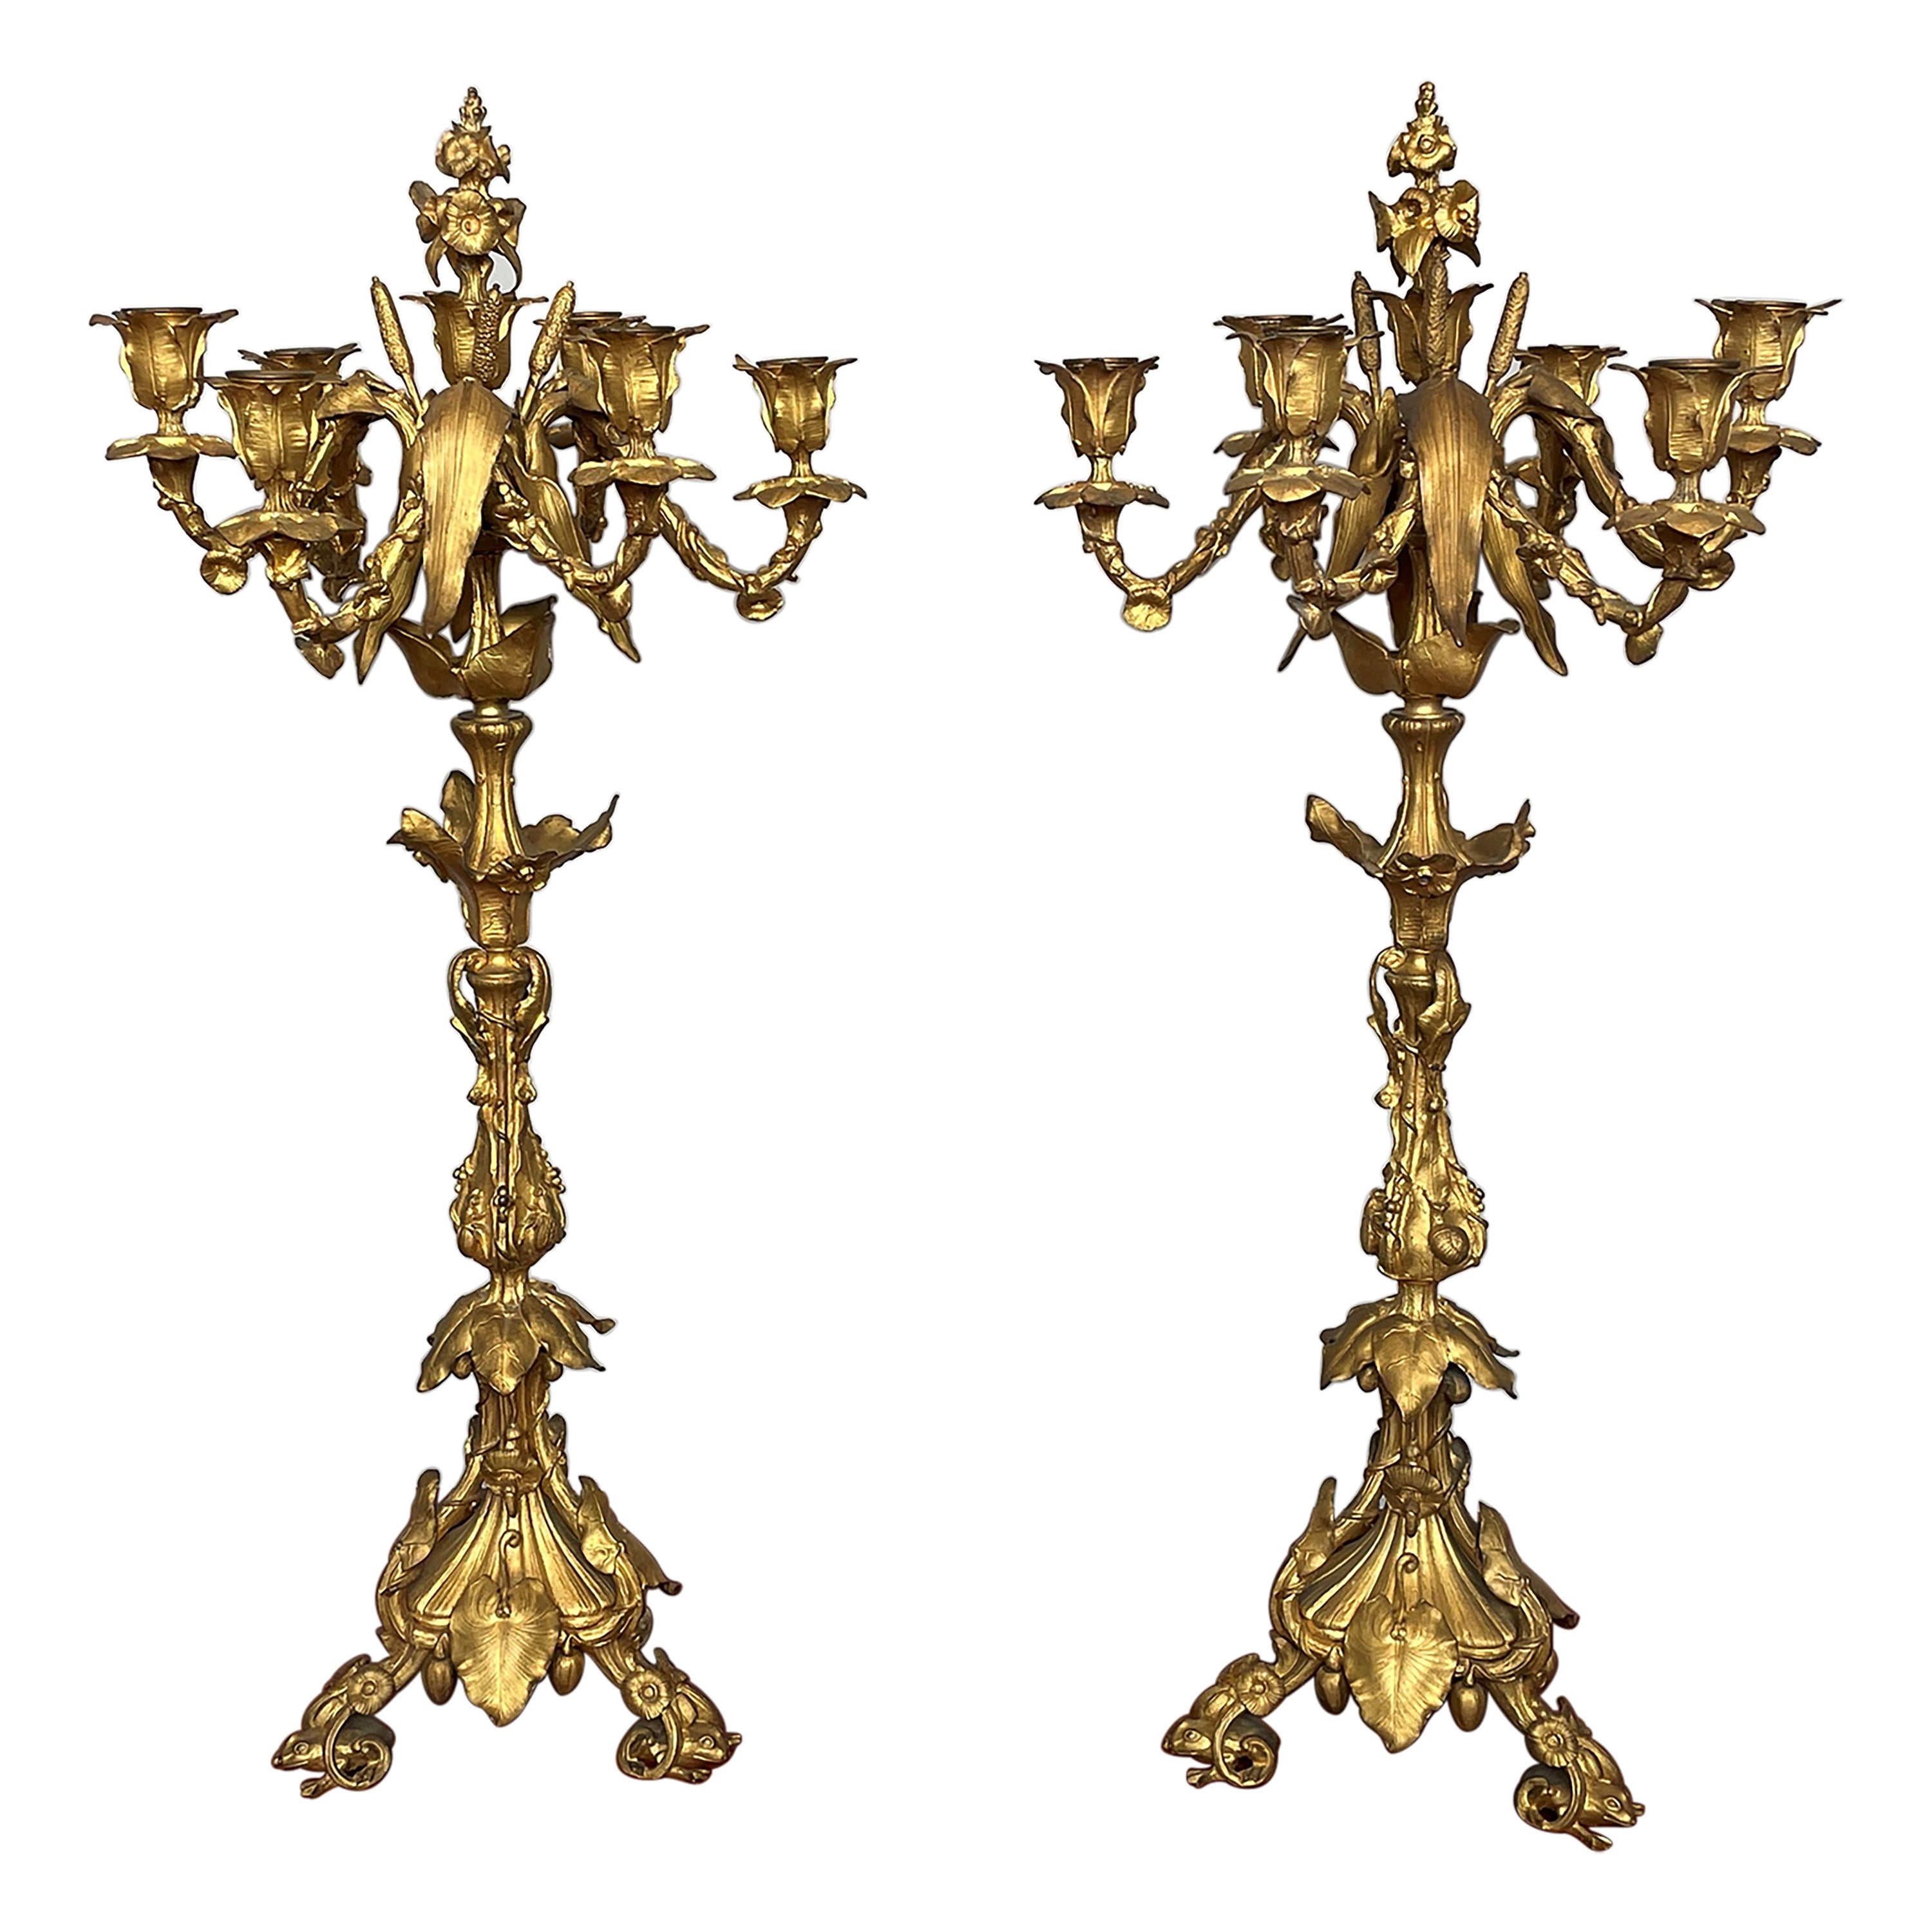 Important Pair of Belle Epoque Ormolu Candelabras w Frog Sculptures by H. Picard